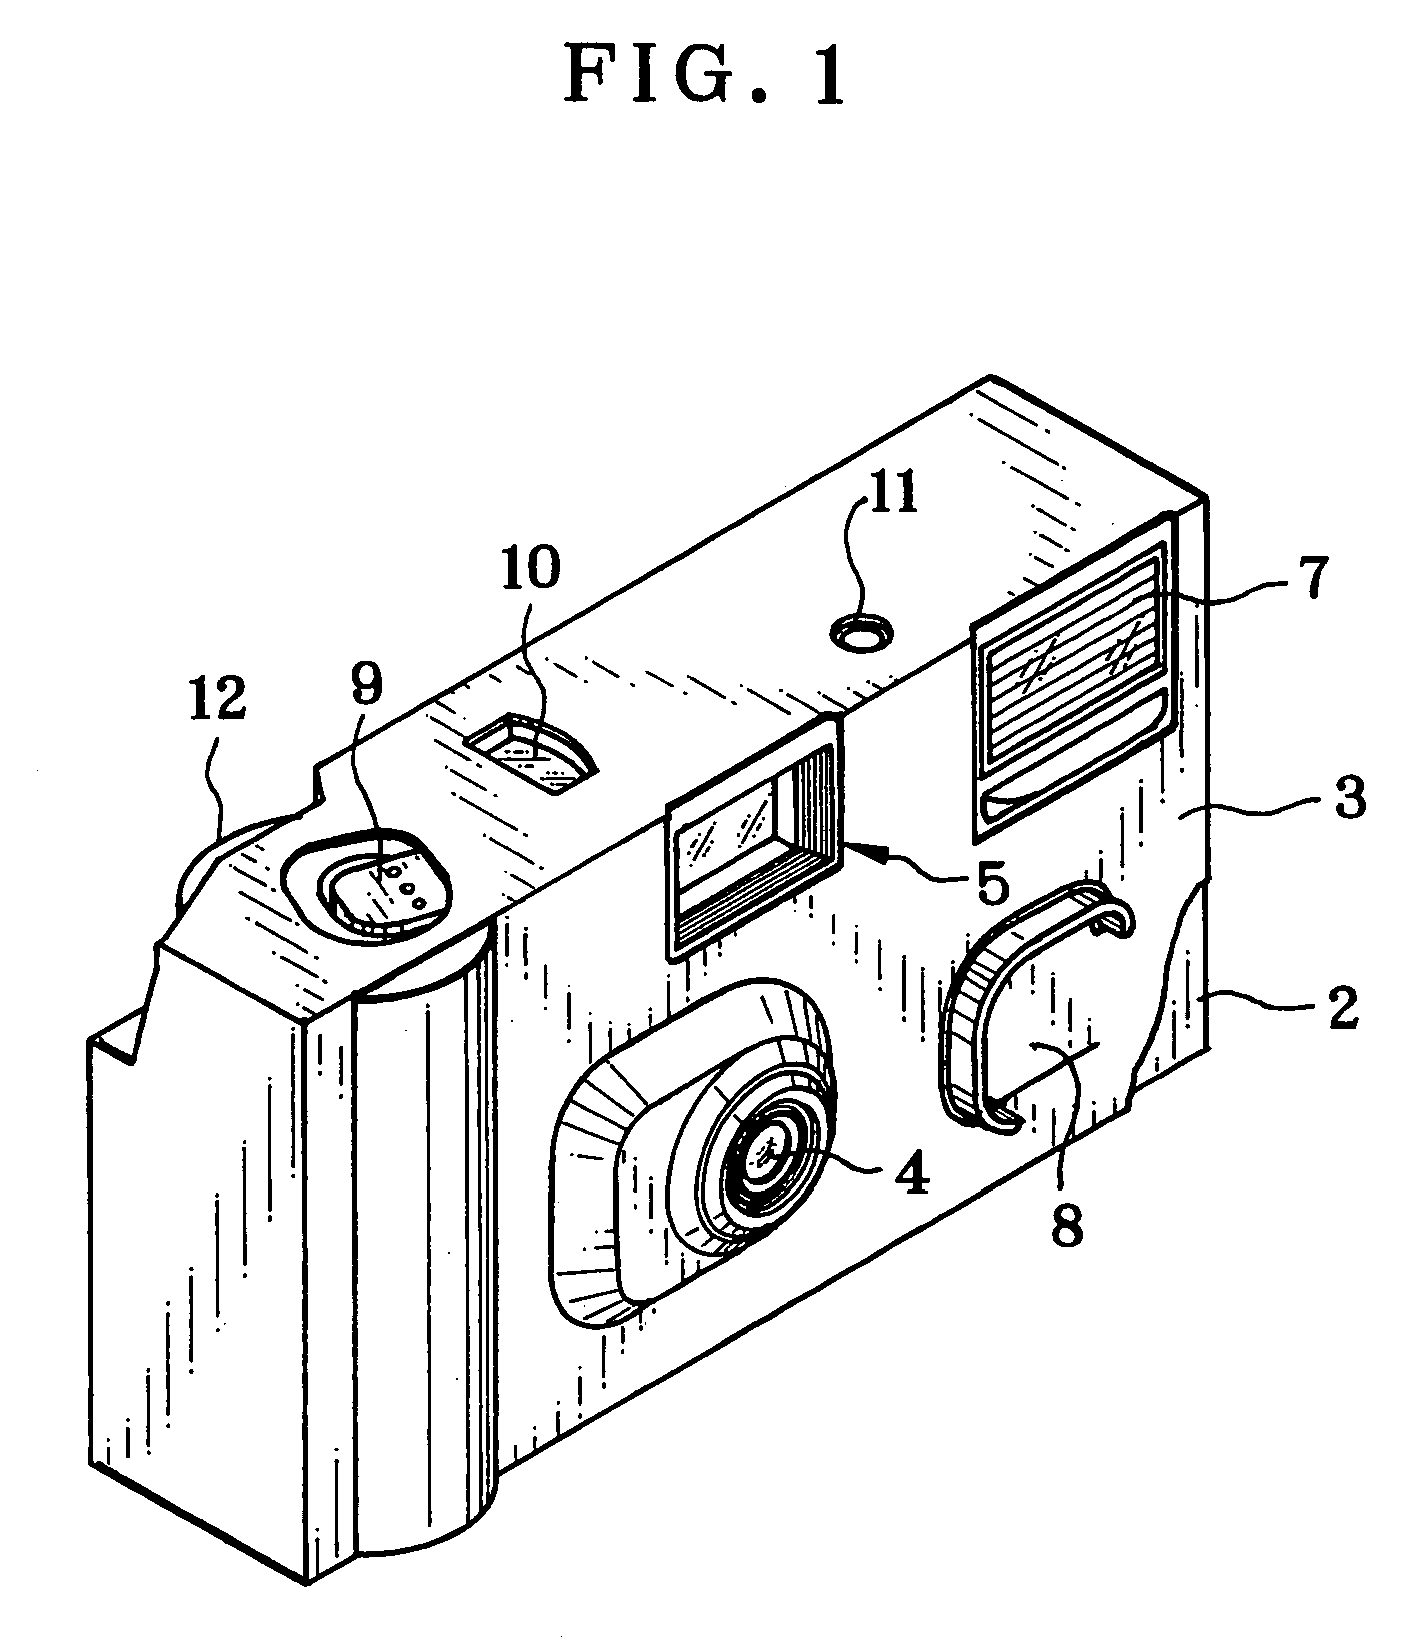 Lens-fitted photo film unit and cassette for photo film